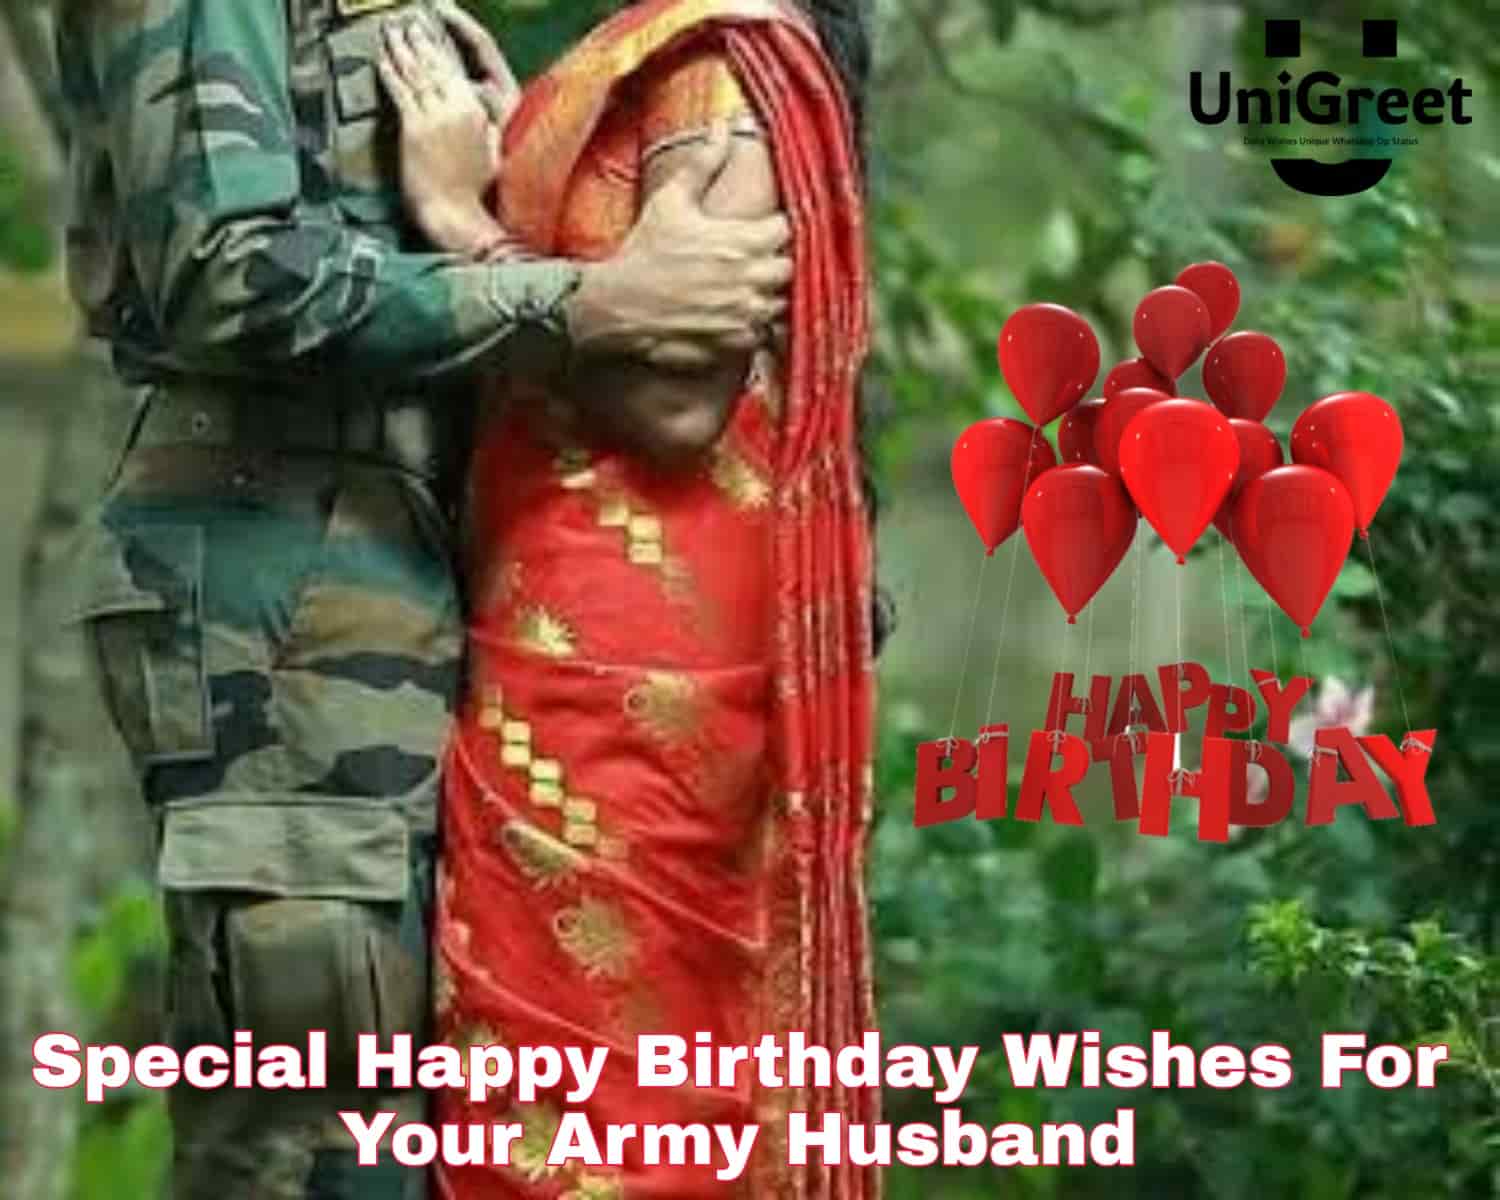 50 Heartfelt Happy Birthday Wishes For Your Army Husband - Show ...